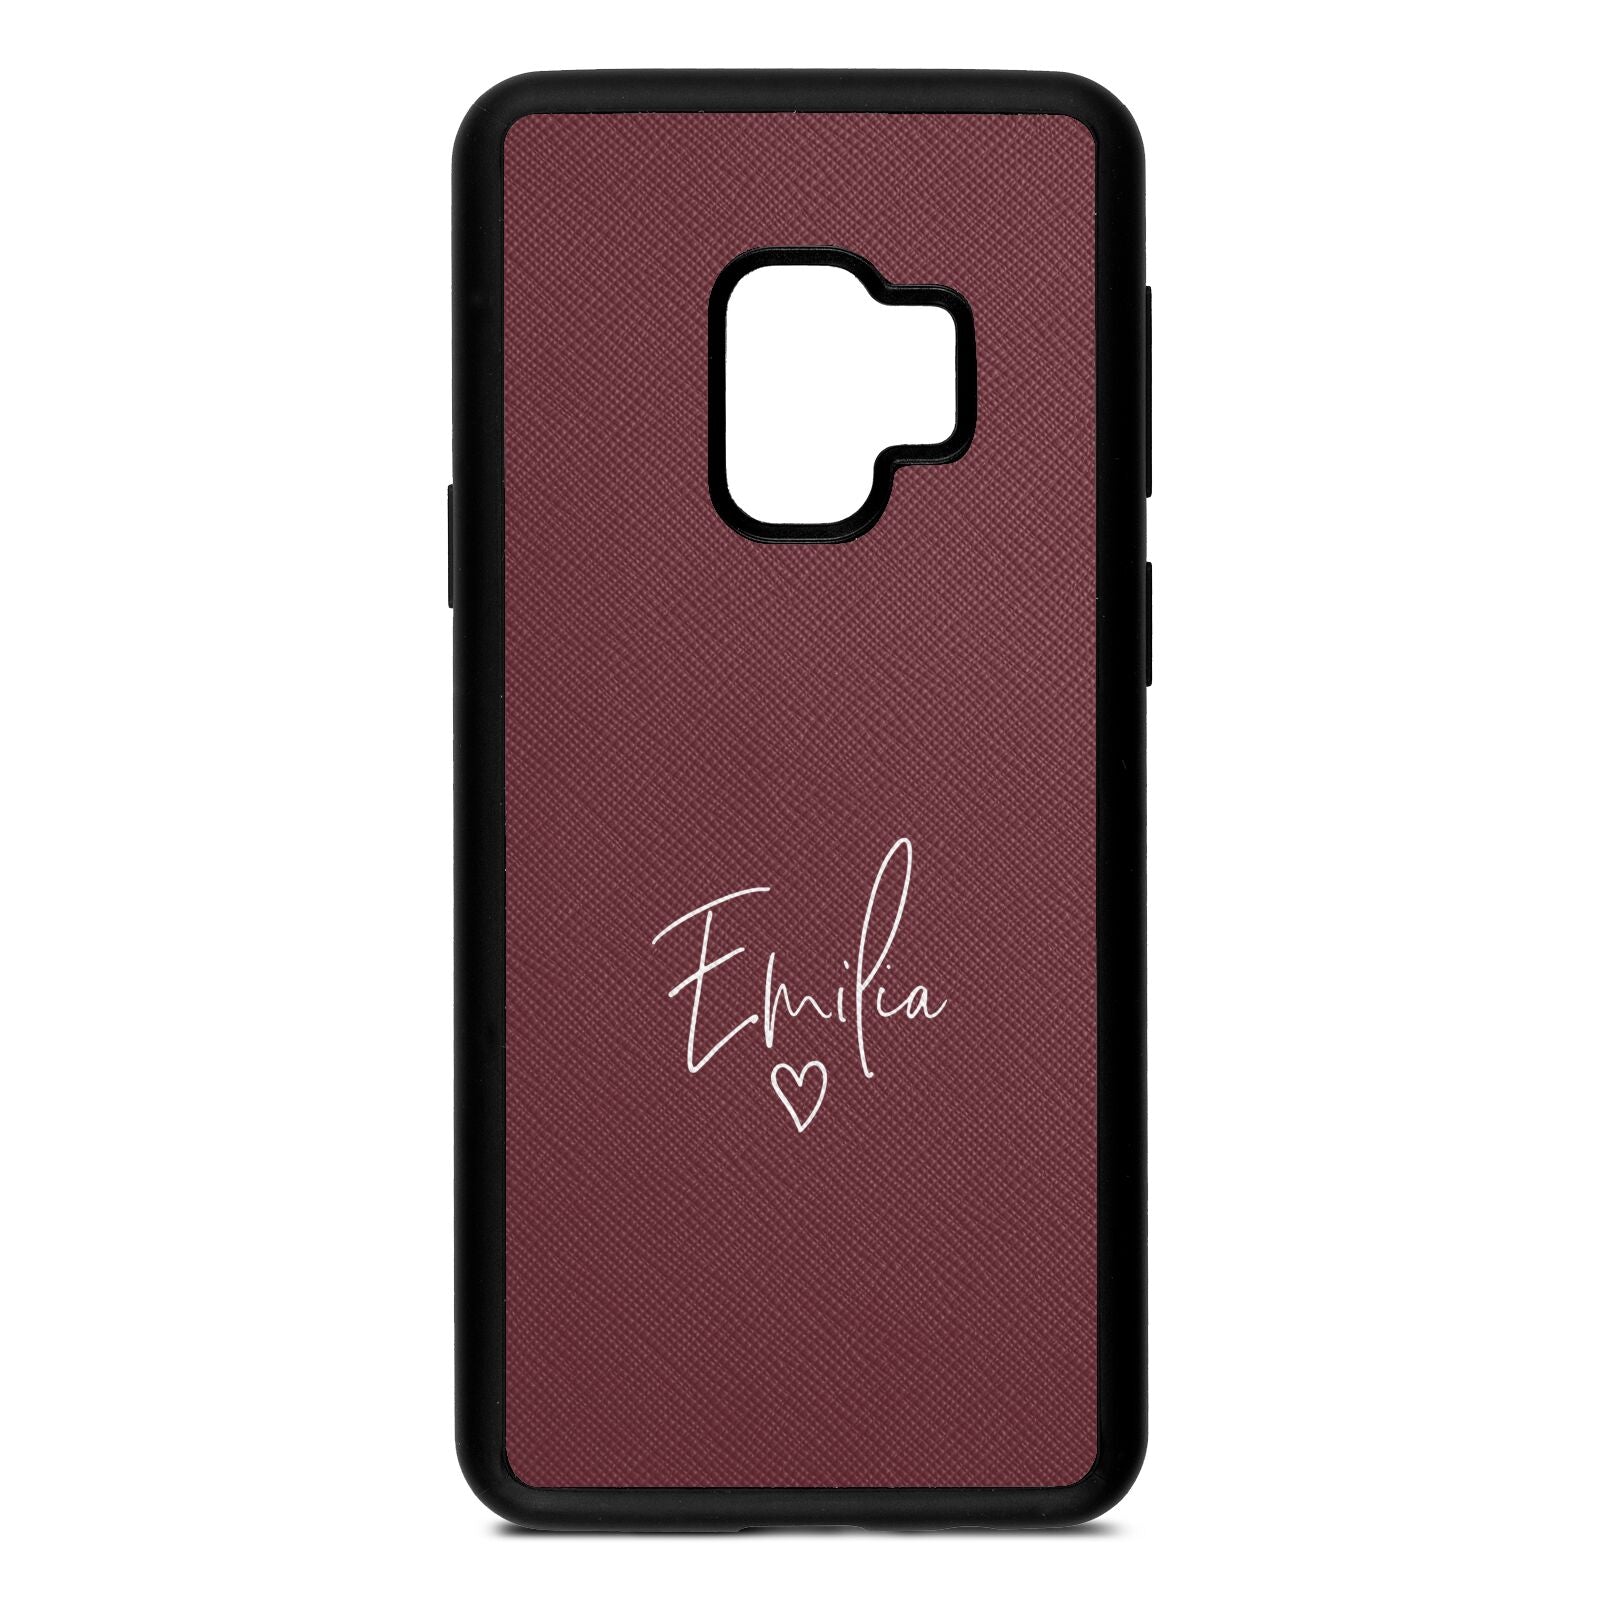 White Handwritten Name Transparent Rose Brown Saffiano Leather Samsung S9 Case